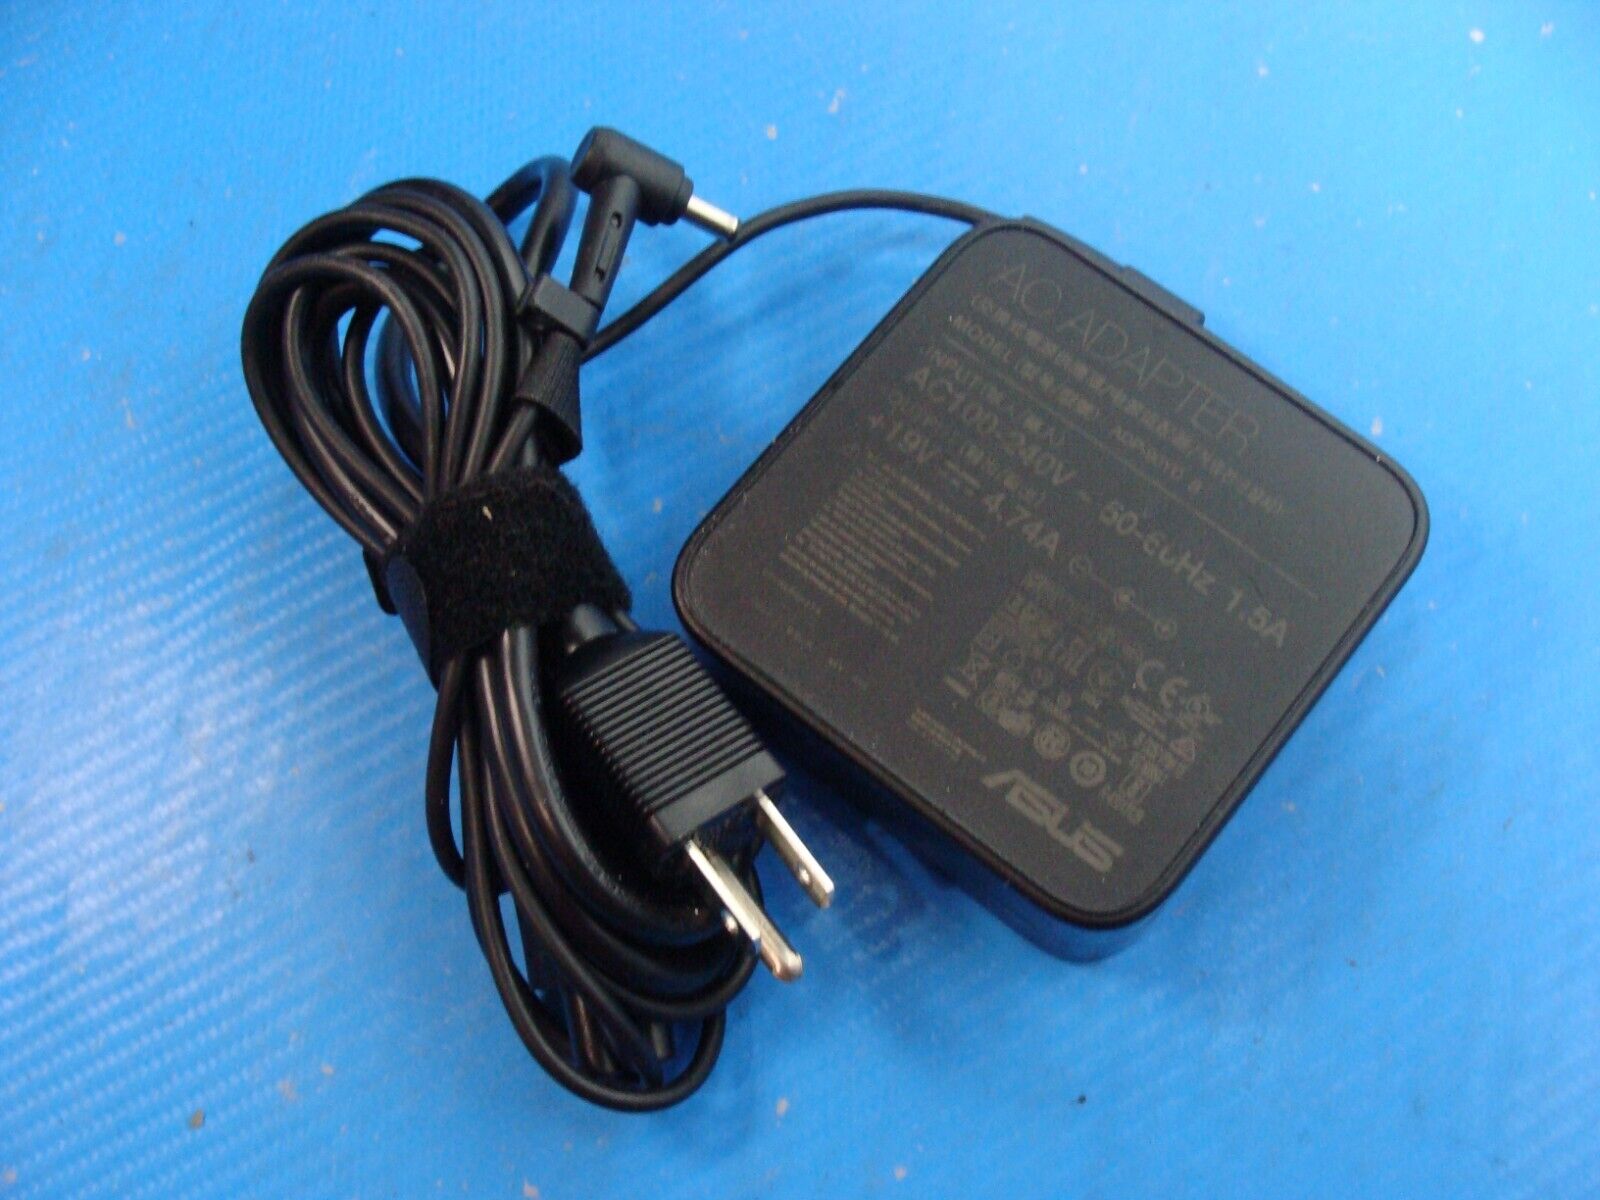 Genuine ASUS Laptop Charger AC Power Adapter ADP-90YD B 90W 4.5mm Tip Center Pin